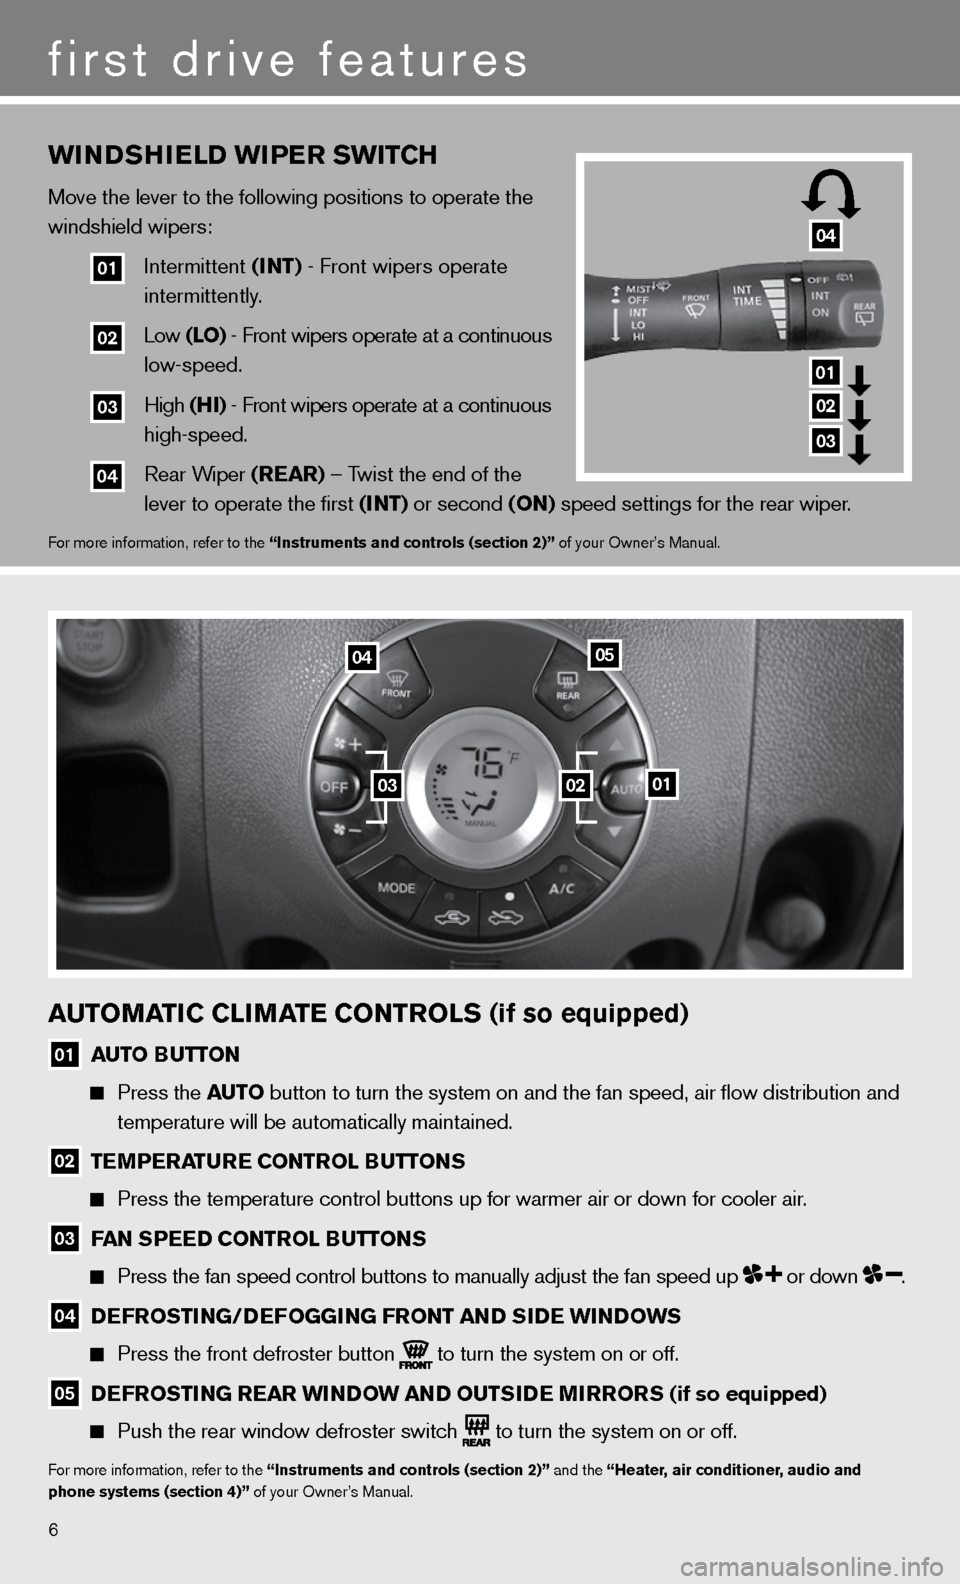 NISSAN CUBE 2011 3.G Quick Reference Guide 6
wINDSHIeLD wIPer SwITCH
Move the lever to the following positions to operate the 
windshield wipers:
  
01  intermittent (INT) - front wipers operate 
        intermittently. 
  
02  Low (LO) - fron